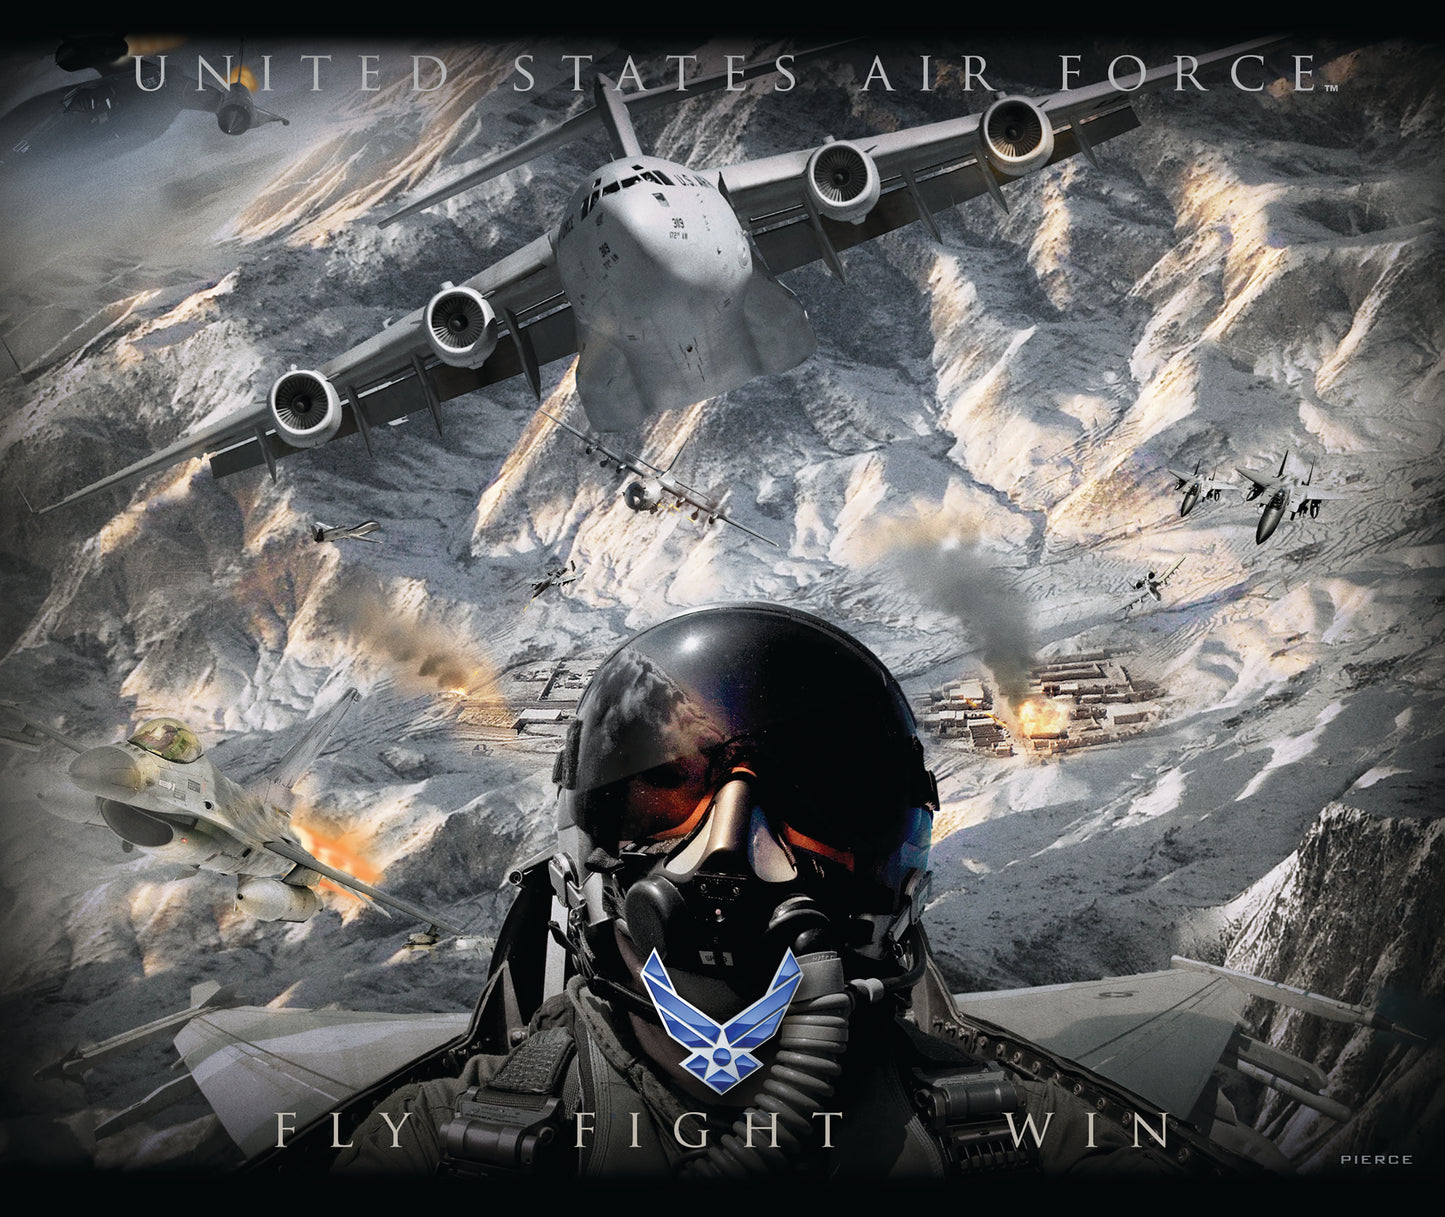 U.S. Air Force with Fly, Fight, Win Custom Photography on Mouse Pad